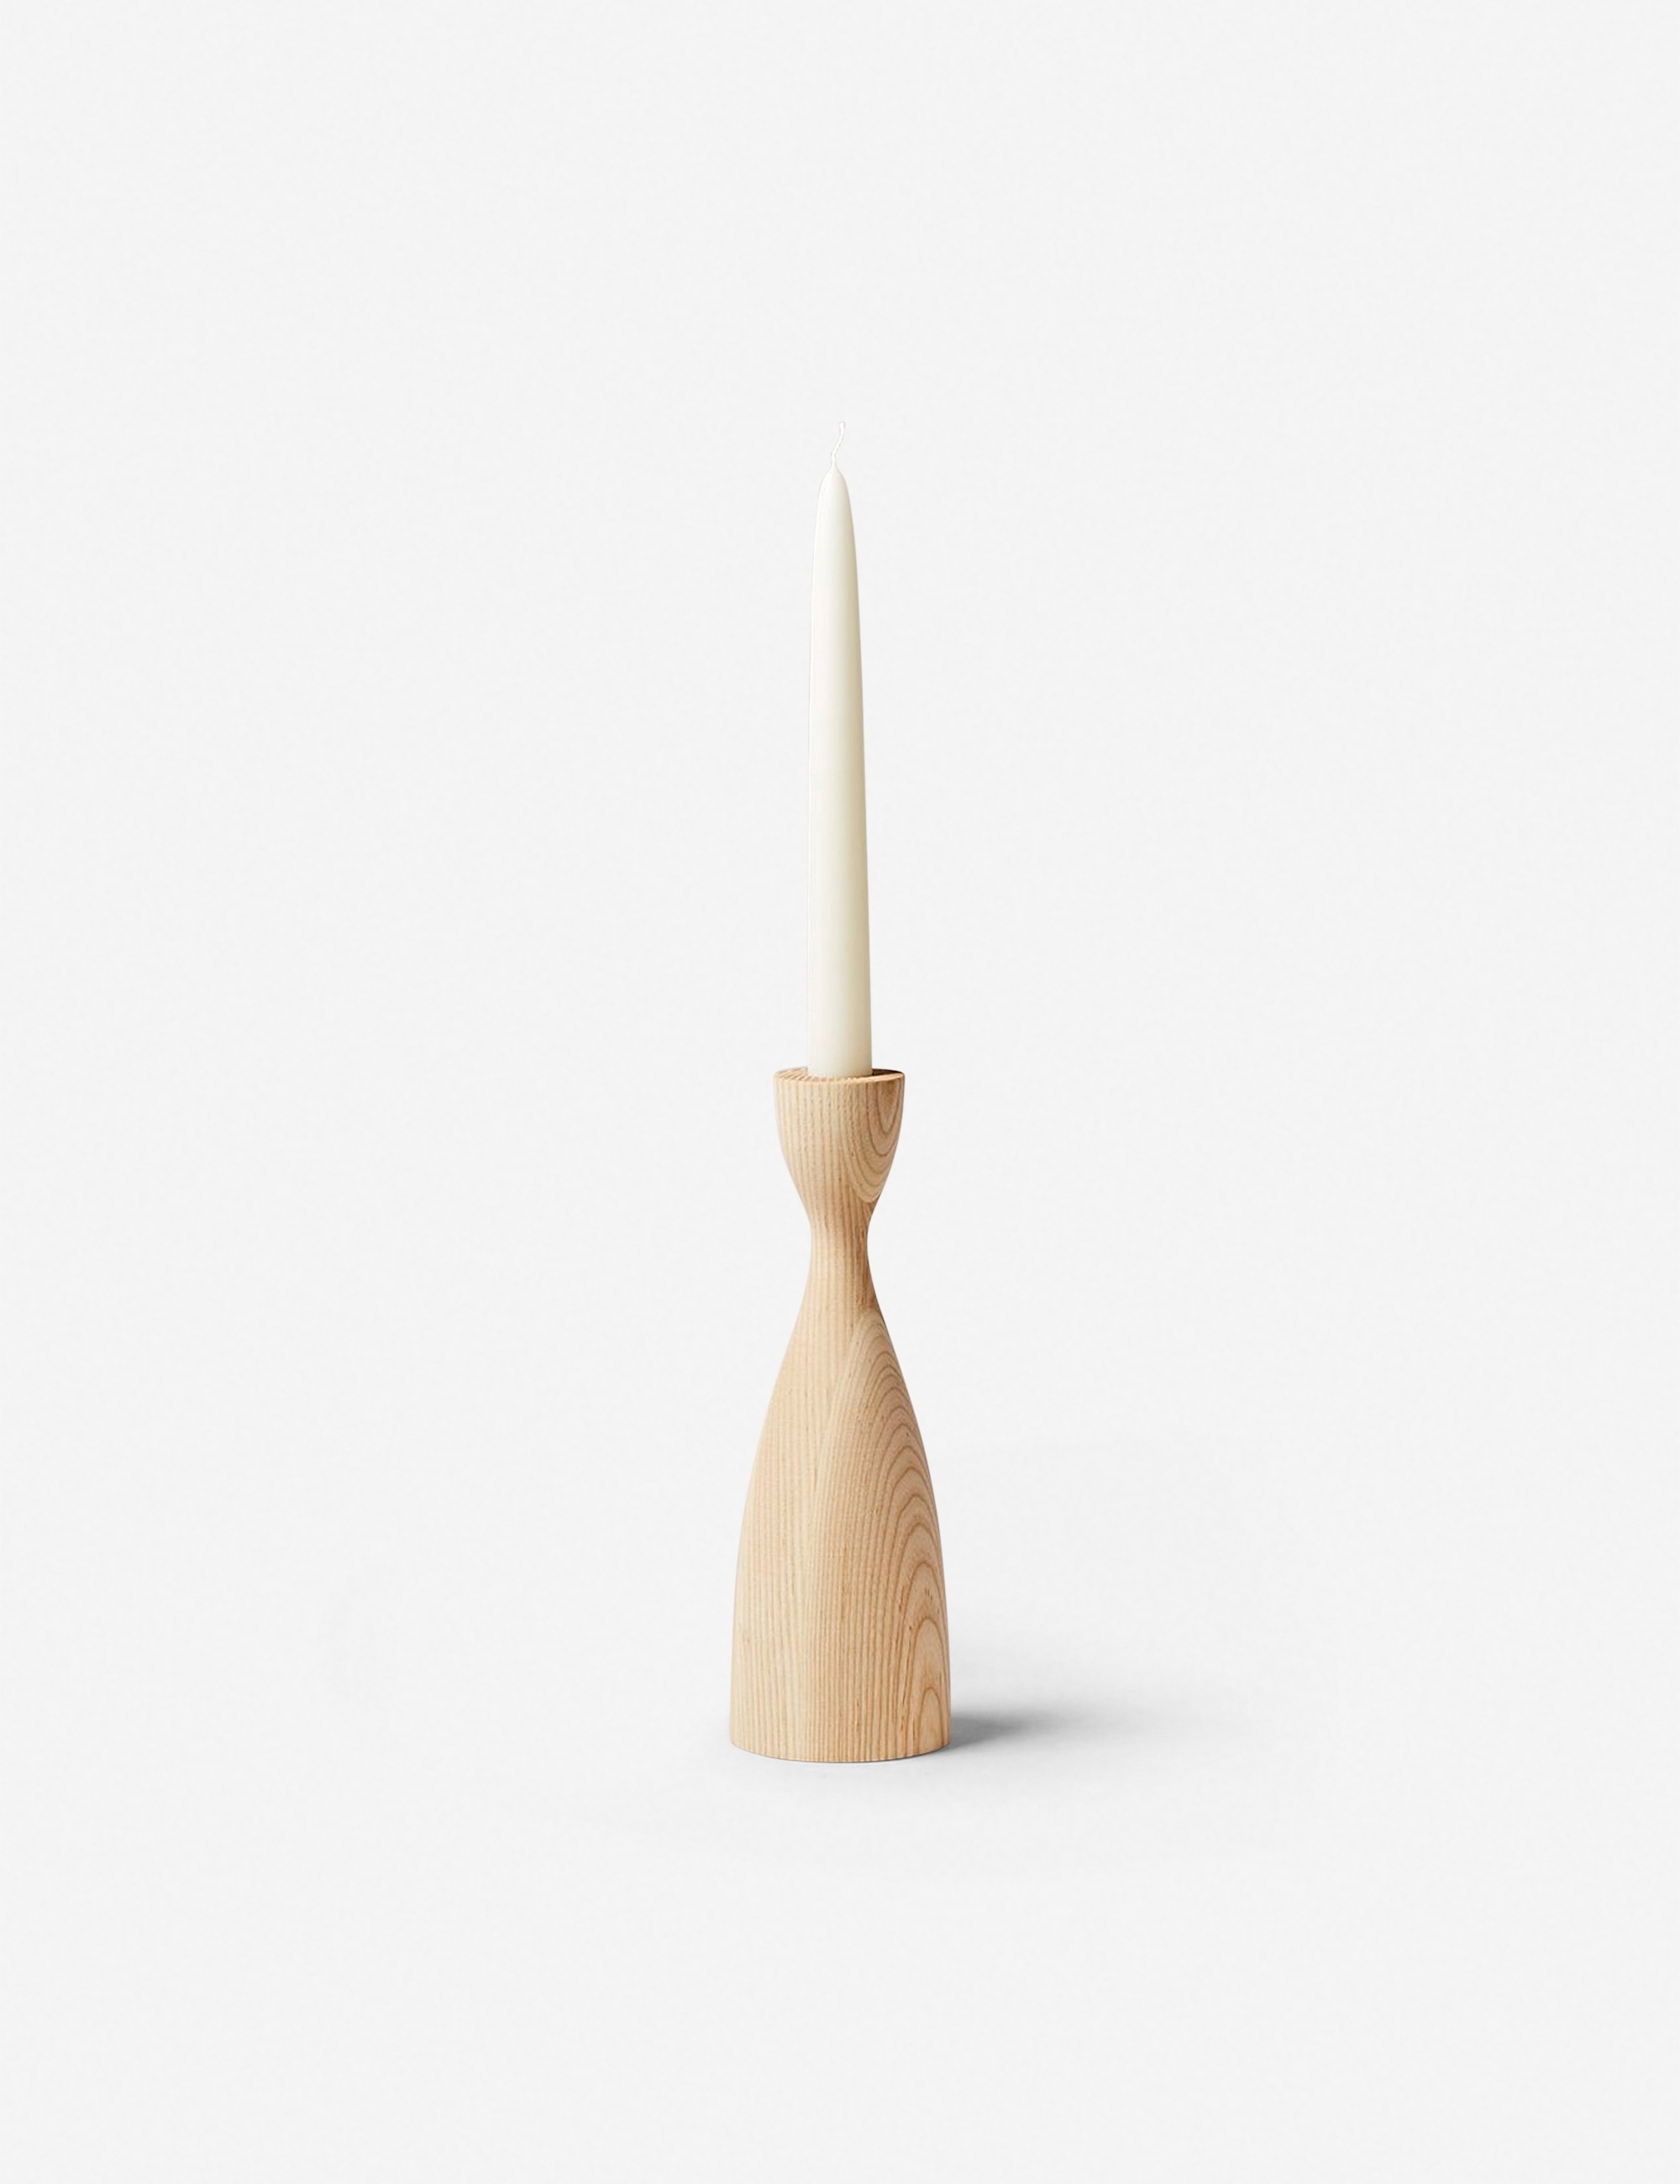 Pantry Candlestick by Farmhouse Pottery - Image 3